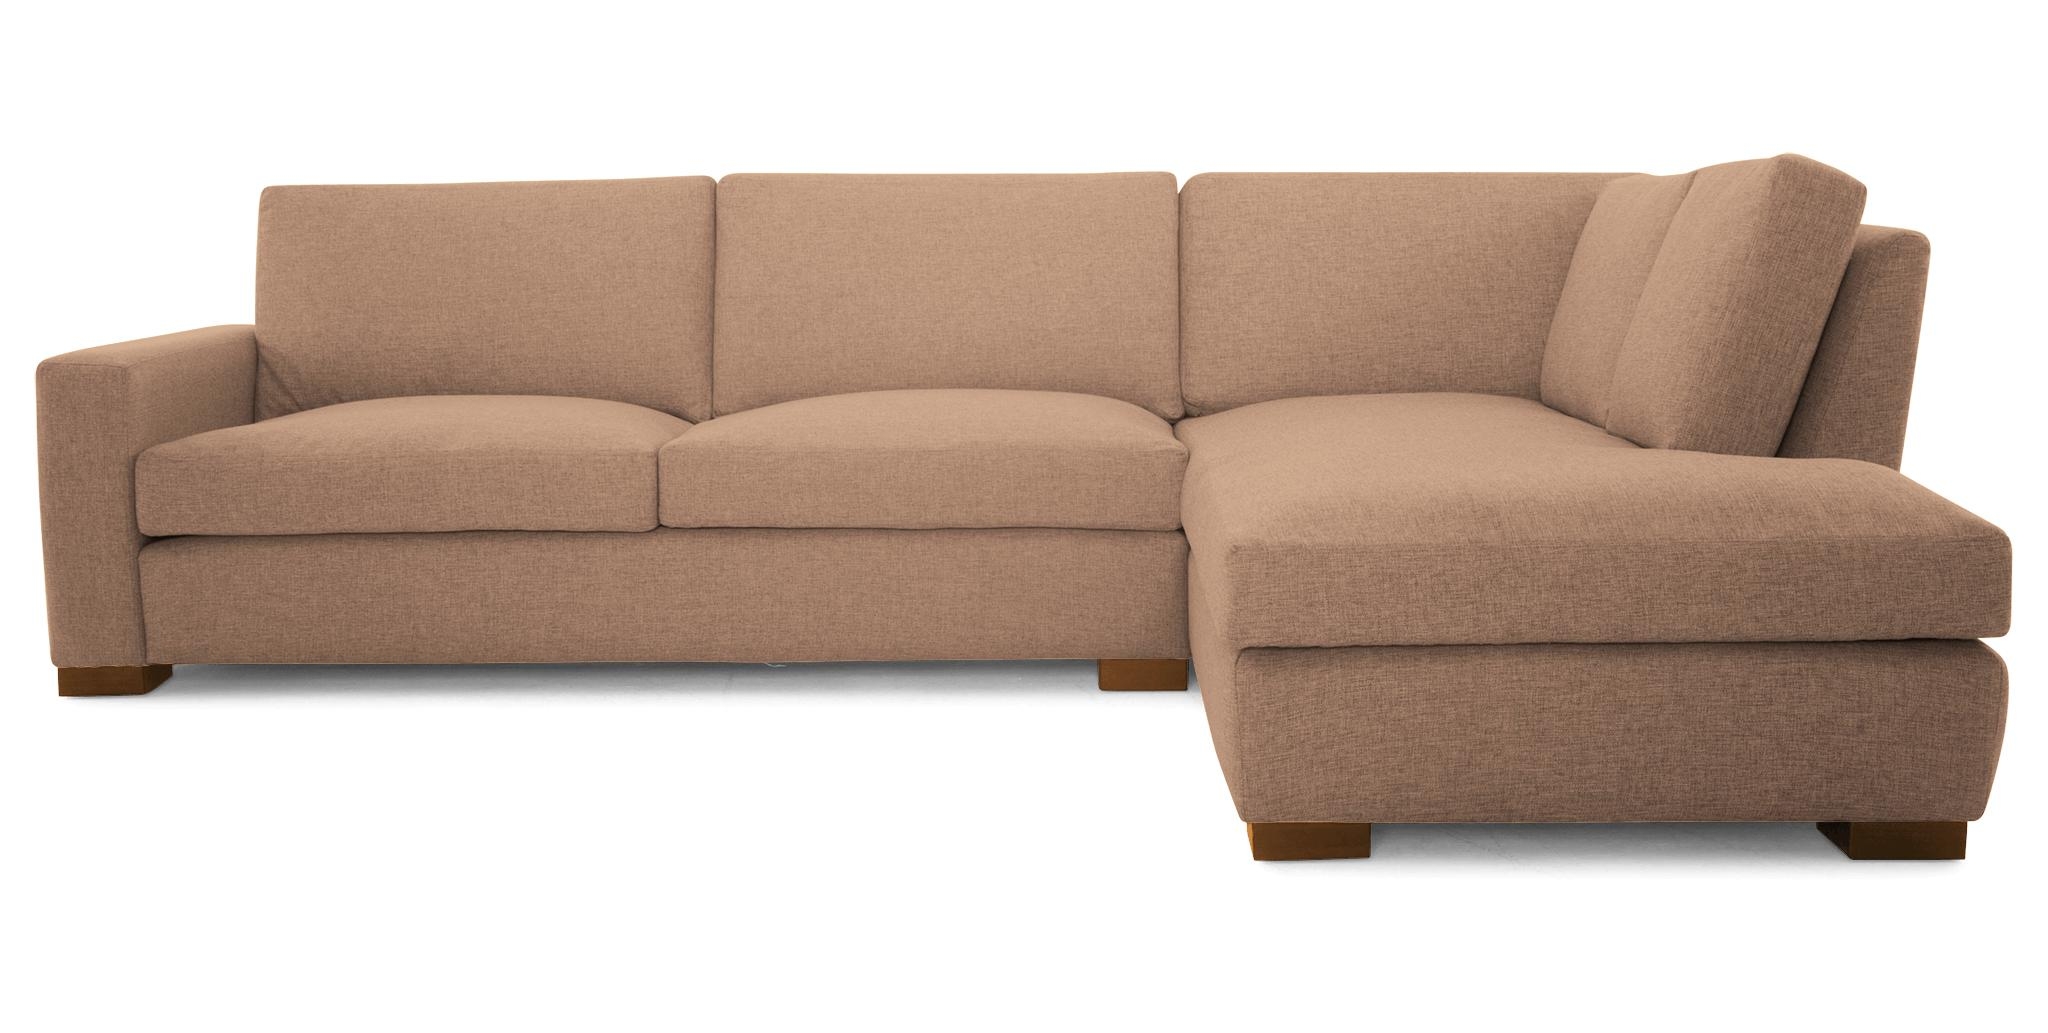 Pink Anton Mid Century Modern Sectional with Bumper - Royale Blush - Mocha - Right  - Image 0